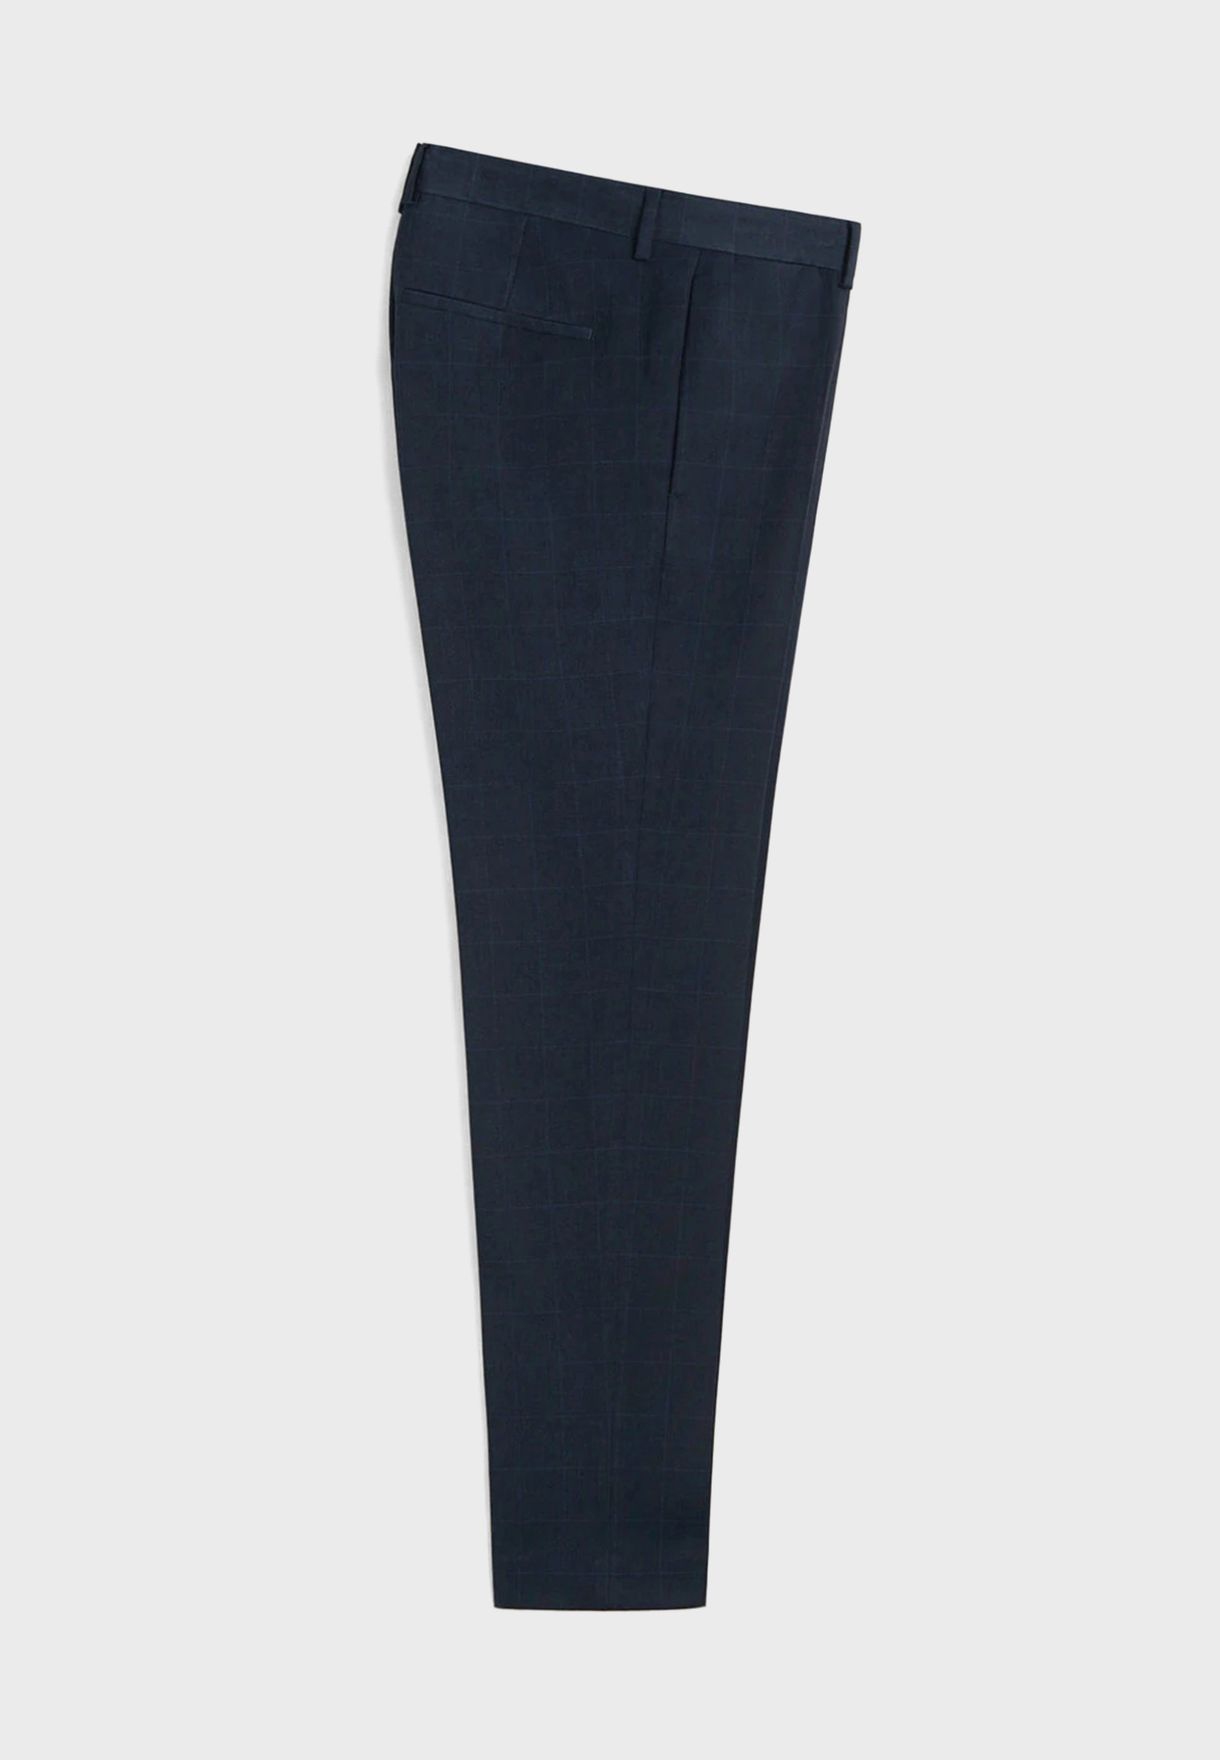 Checked Slim Fit Trousers